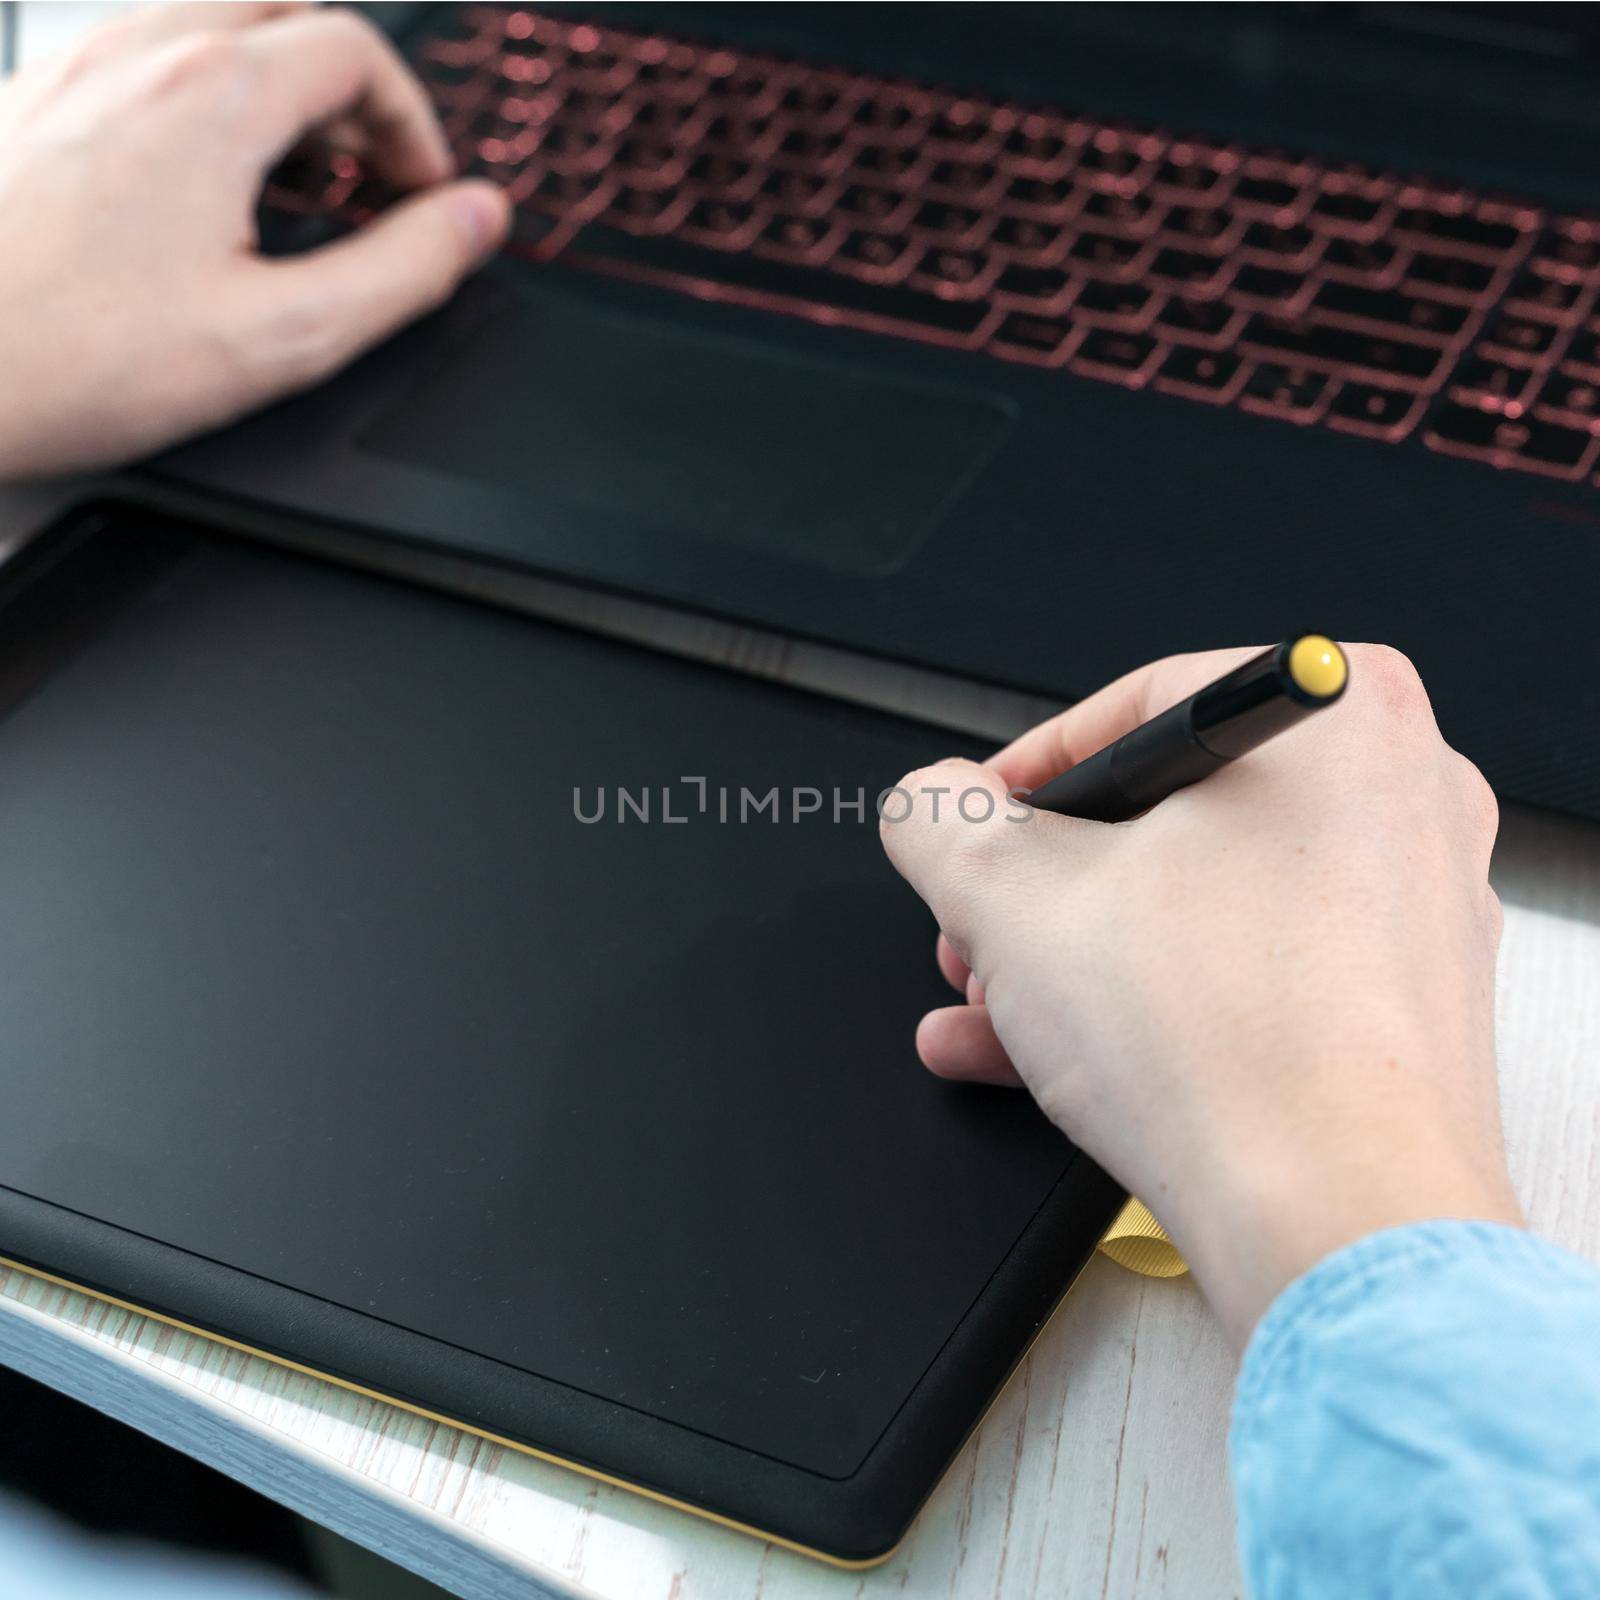 designer working on a professional tablet with a pen, Close-up of a man's hand holding a graphic pen for drawing